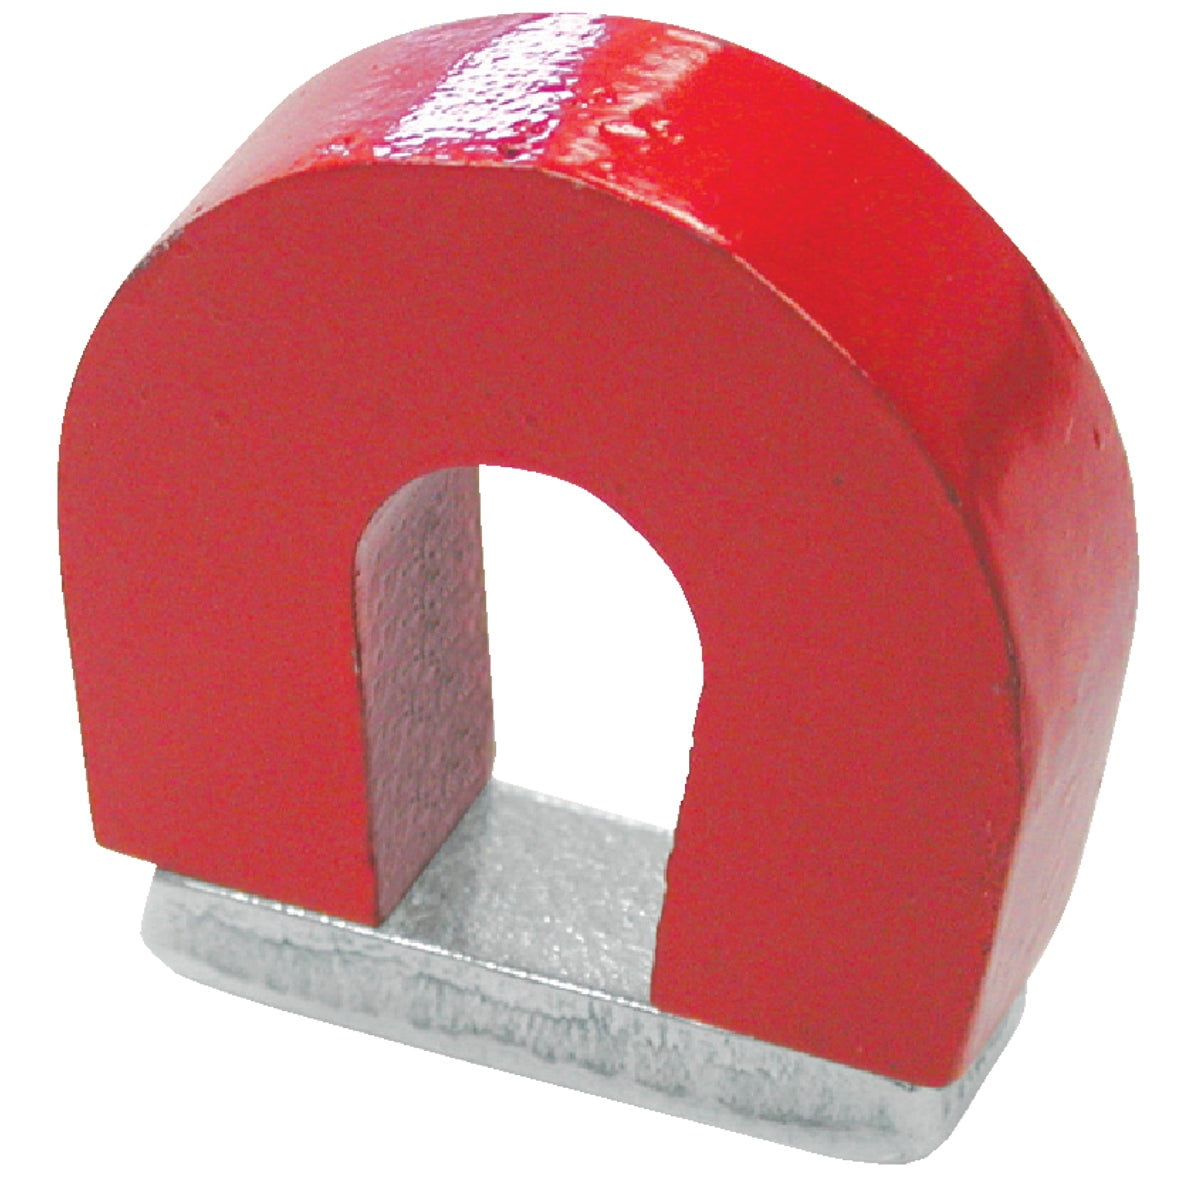 General Tools #370-2 Horseshoe Alnico Magnet 12lb Pull for sale online 